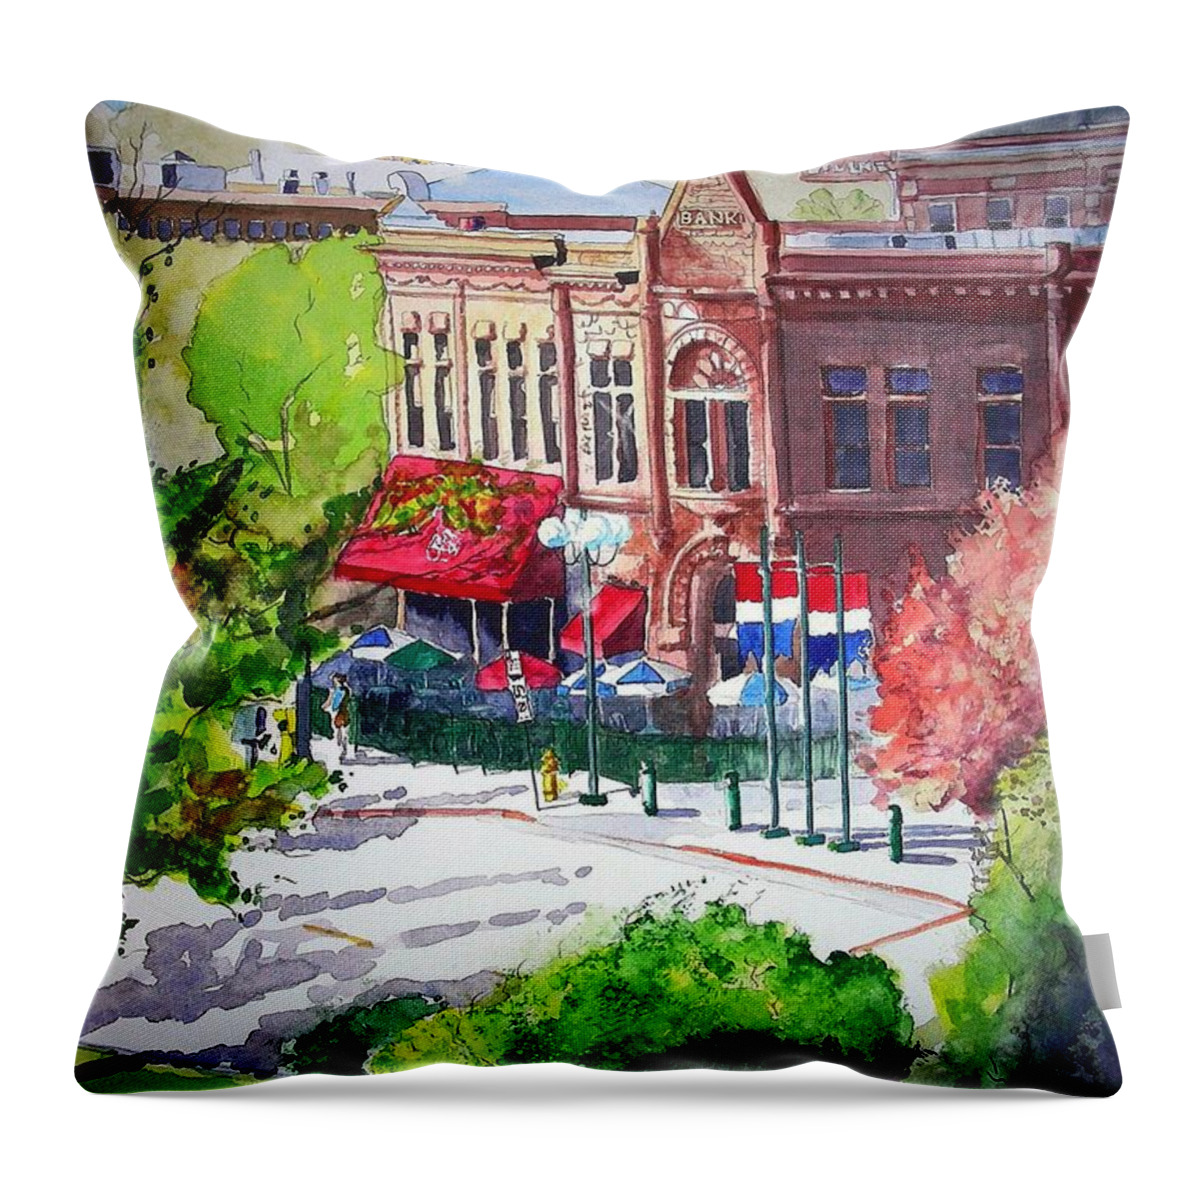 Watercolor Throw Pillow featuring the painting Beau Jo's by Tom Riggs